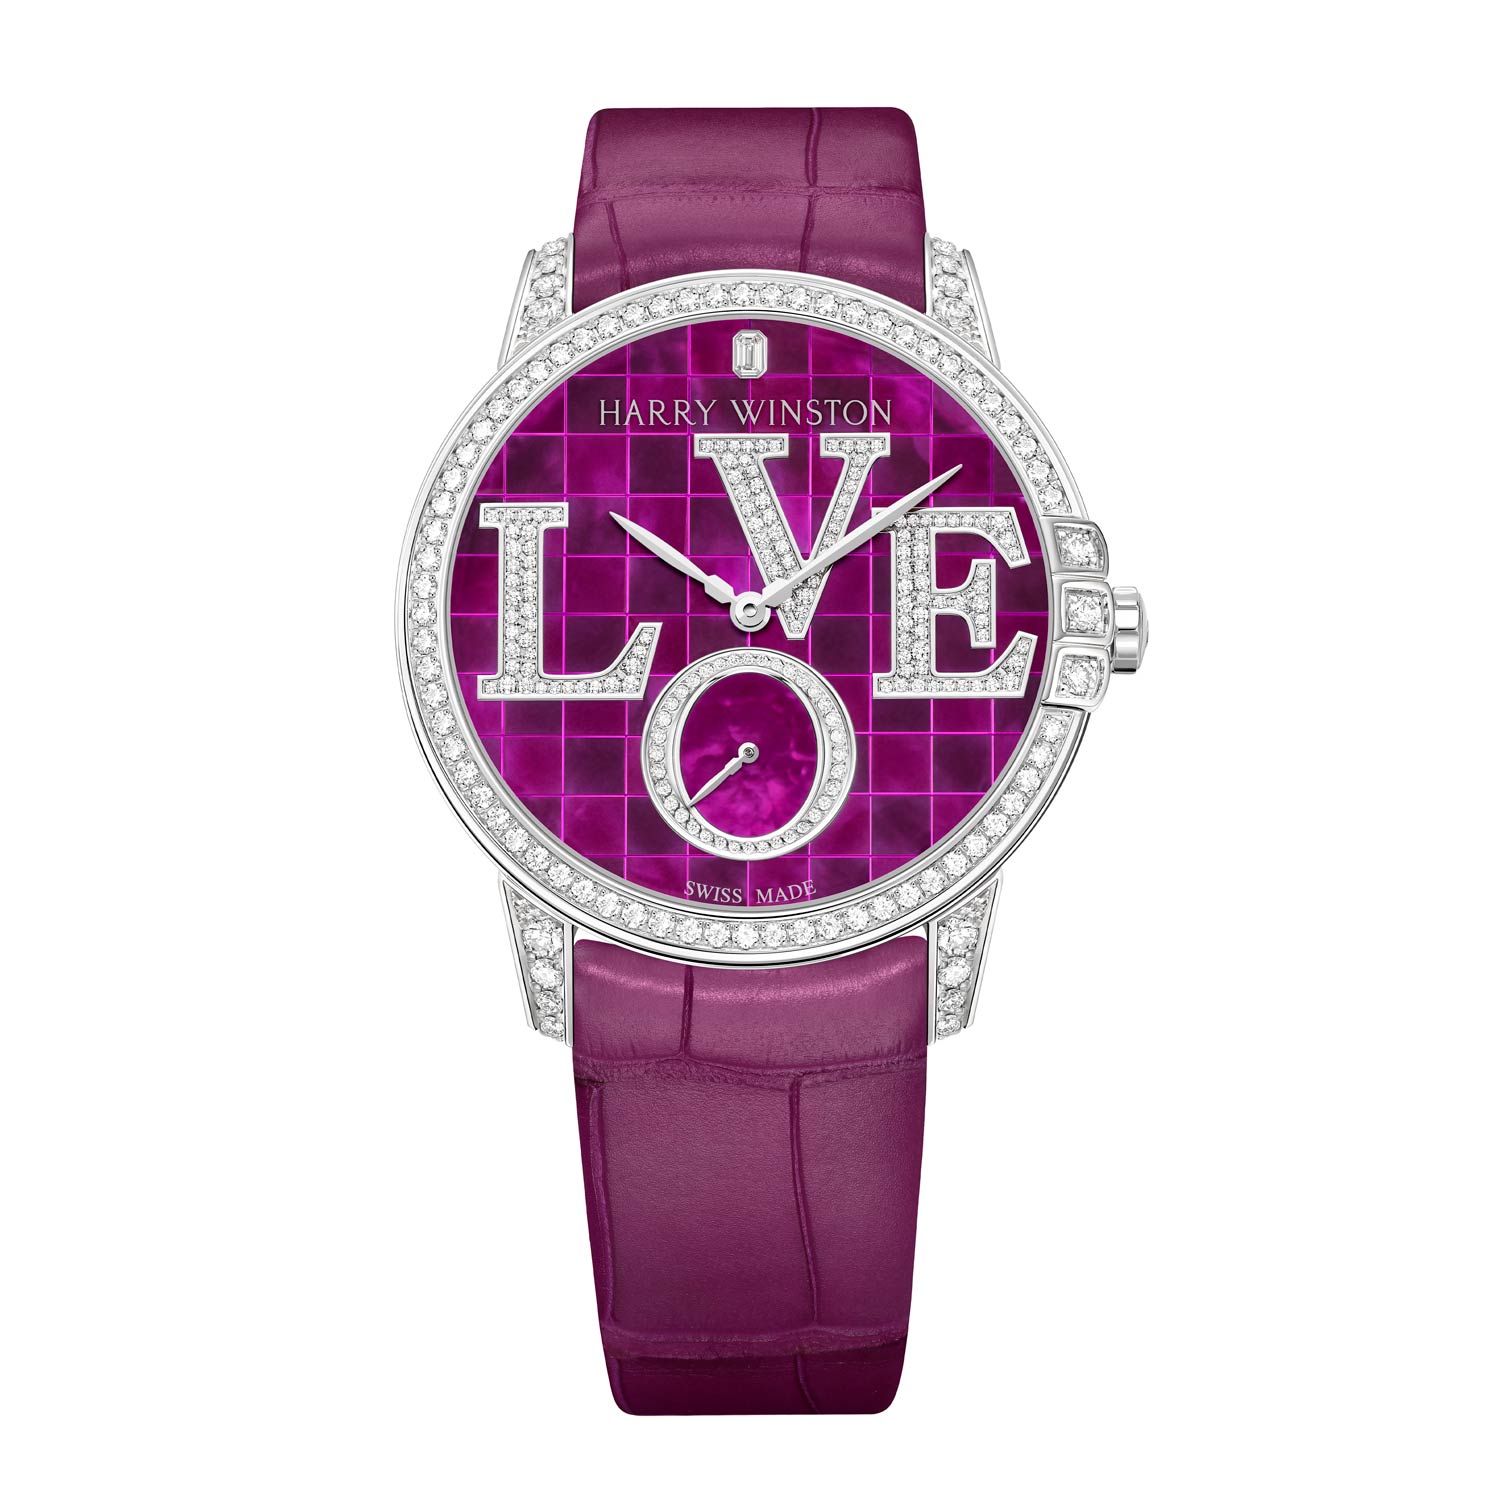 The ‘Winston Eternity’ timepiece evokes a timeless look with a purple colorway